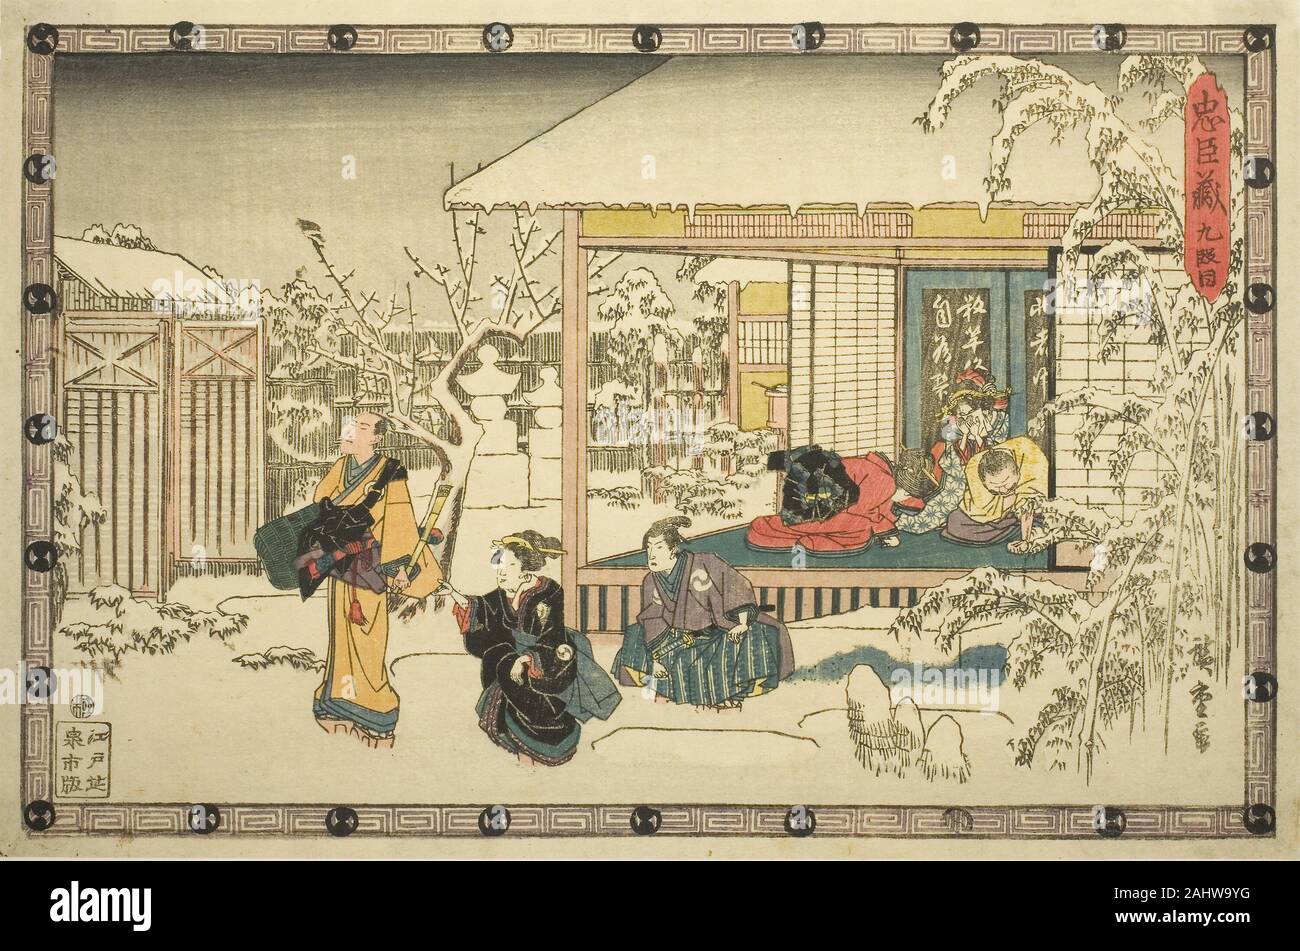 Utagawa Hiroshige. Act 9 (Kyudanme), from the series The Revenge of the Loyal Retainers (Chushingura). 1829–1844. Japan. Color woodblock print; oban In the open room at Yamashima, Honzo has committed seppuku in the presence of his wife and daughter. This is in atonement for his past support of Kira, which greatly contributed to Asano’s death and reduced his retainers to ronin outcasts. In the snow-covered courtyard, Kuranosuke dons the Buddhist monk disguise, which other artists show Honzo wearing on his arrival at Yamashima. Kuranosuke leaves his weeping wife and son Rikiya kneeling in the sn Stock Photo